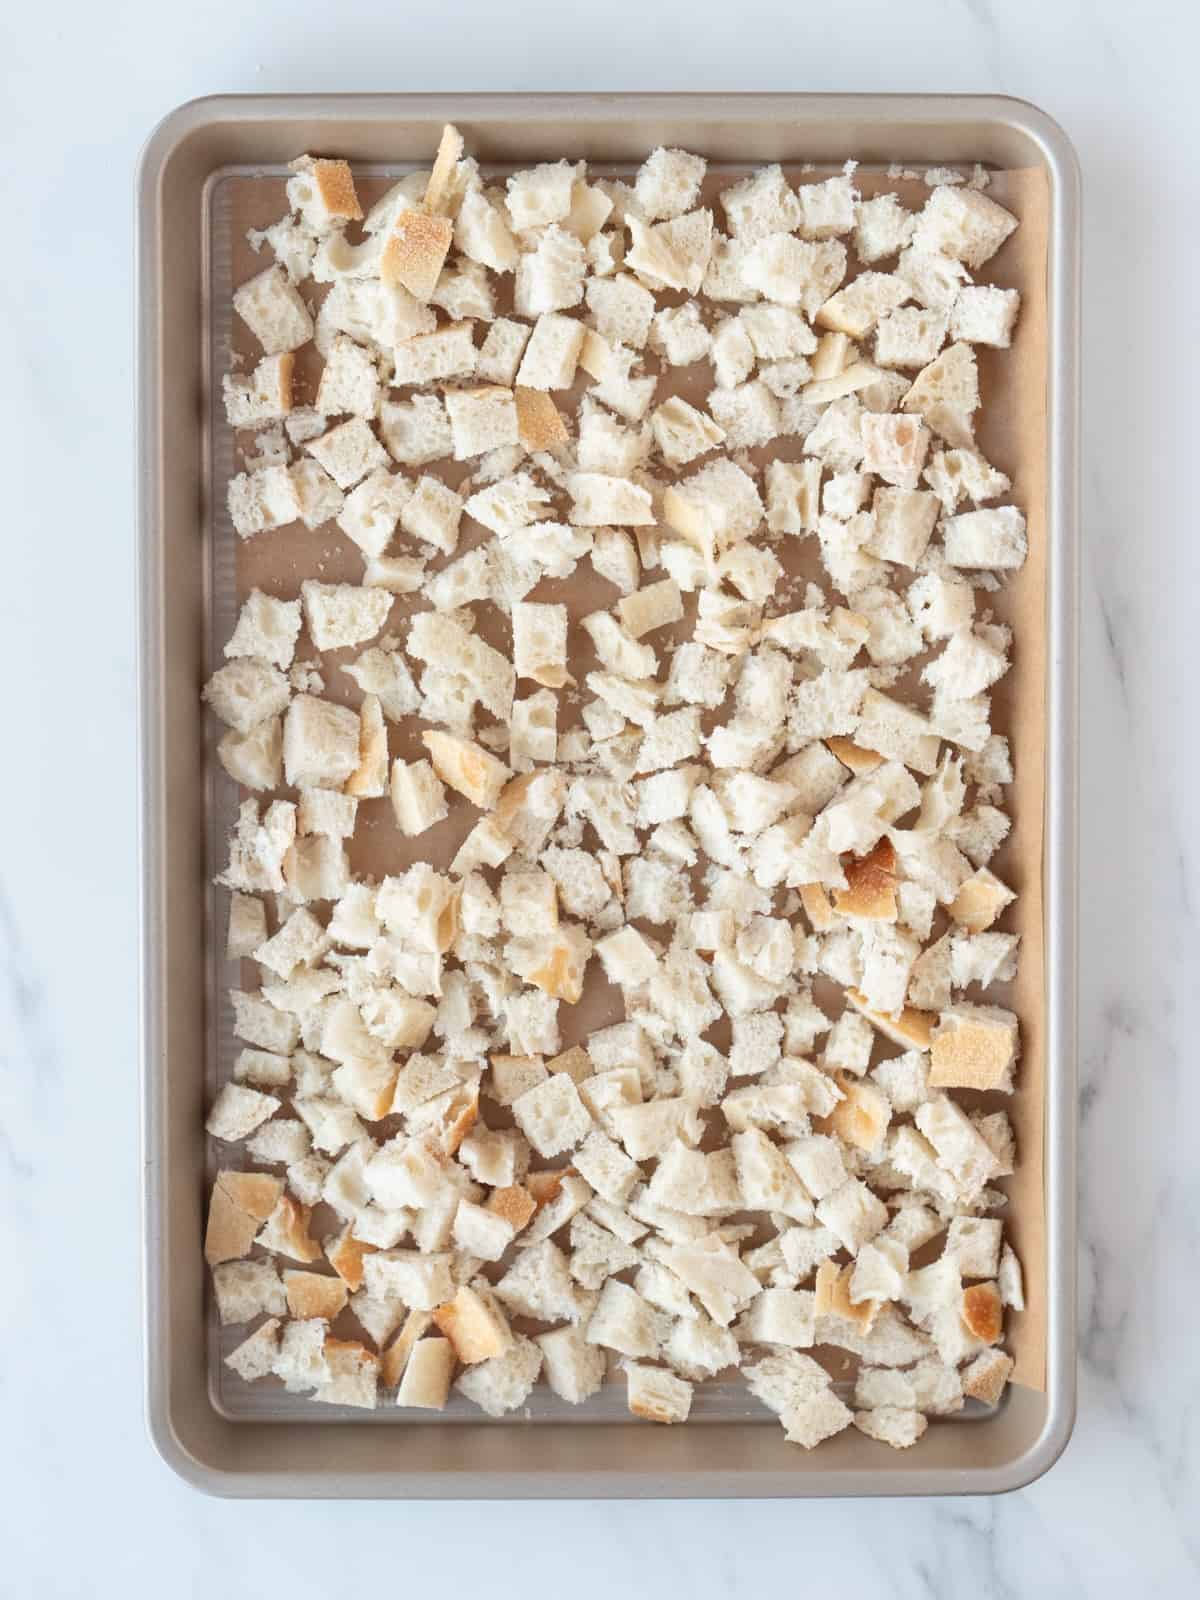 A rectangular parchment paper-lined baking sheet of cubed pieces of bread.